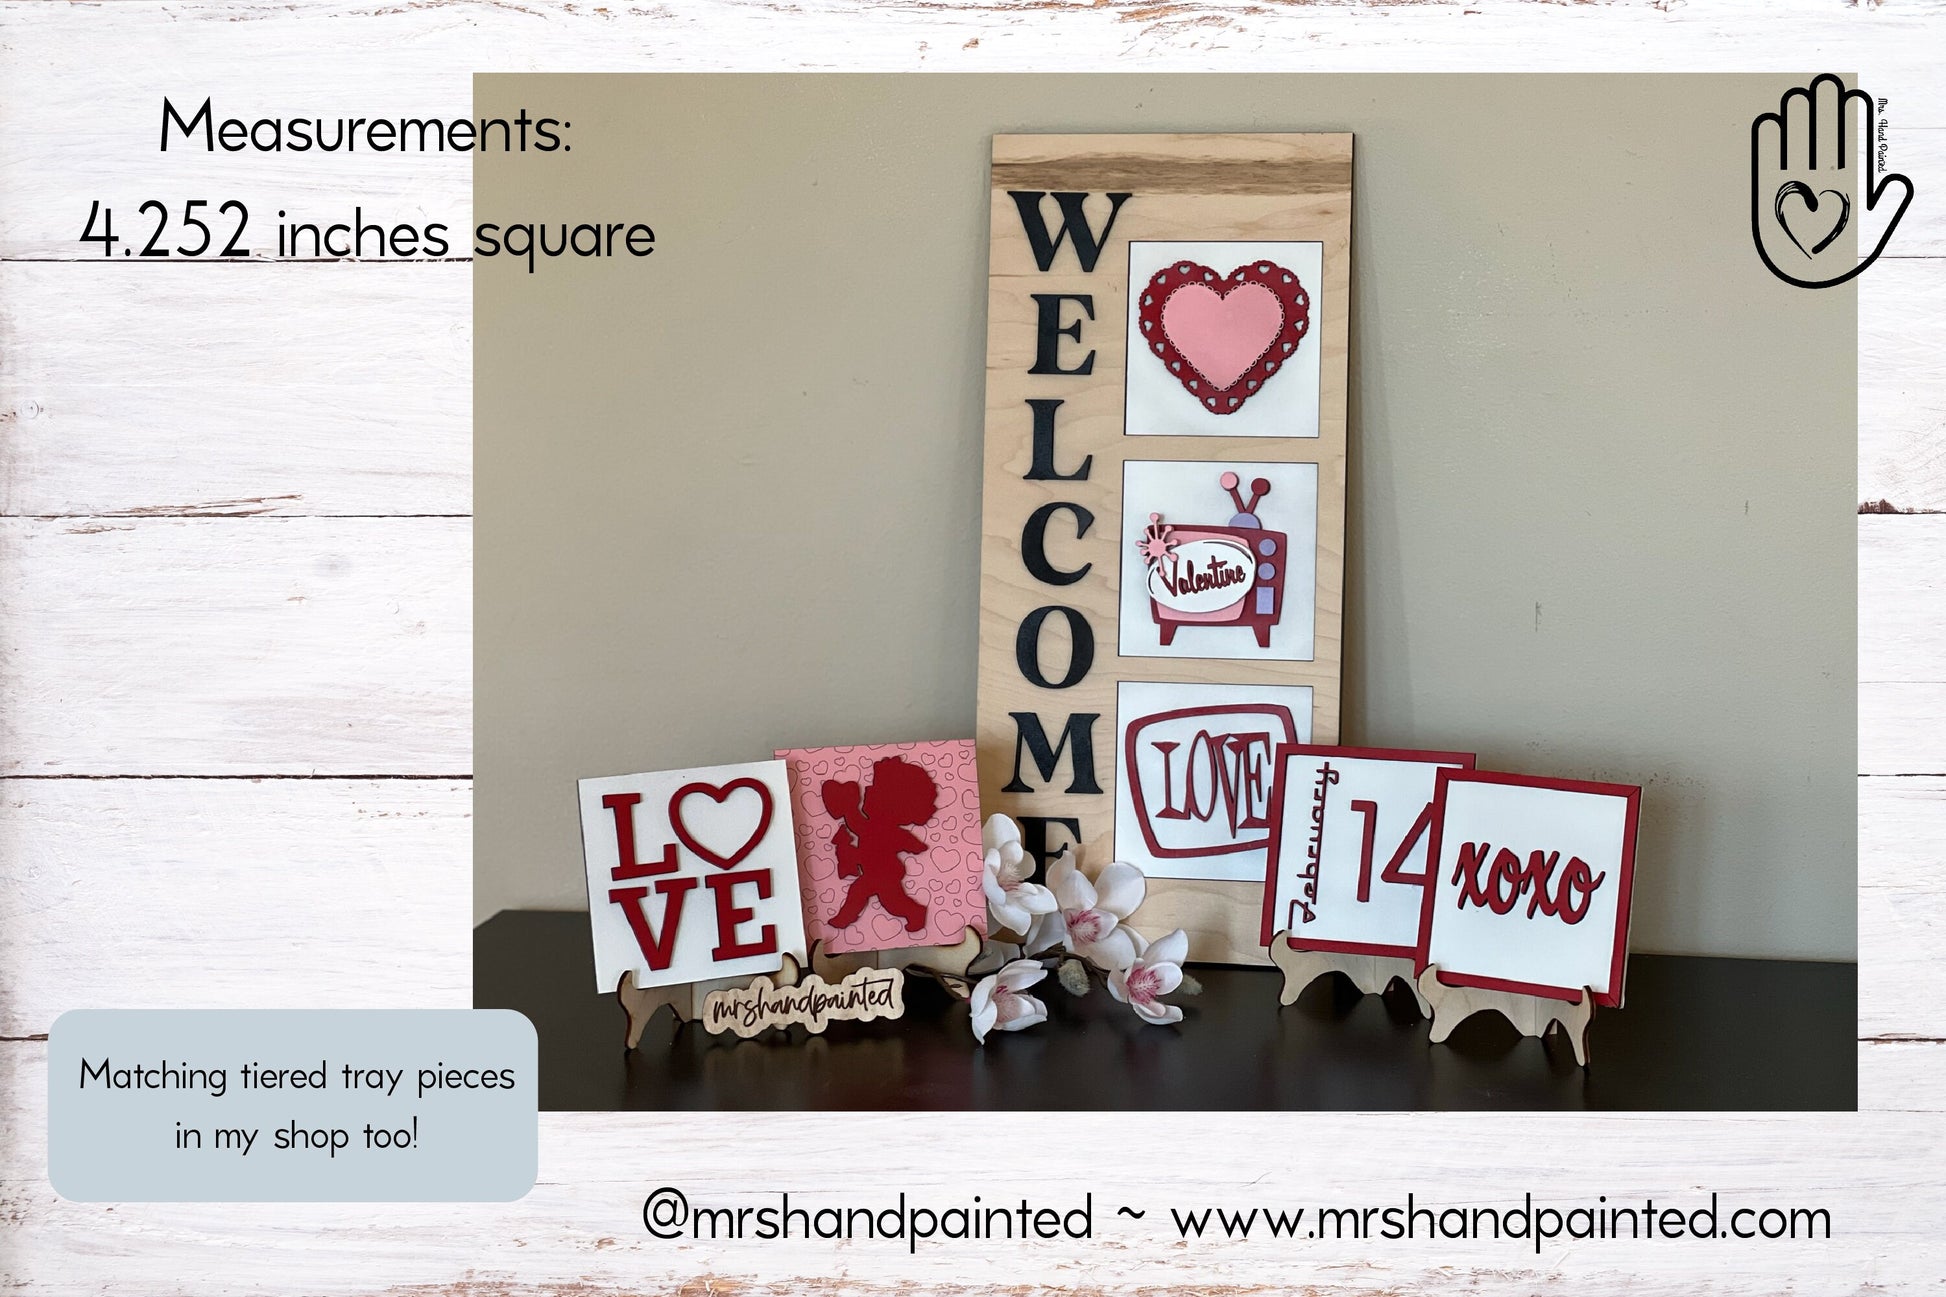 Retro Valetine's Day Interchangeable Sign Tiles Leaning Ladder Signs - Laser Cut Wood Painted